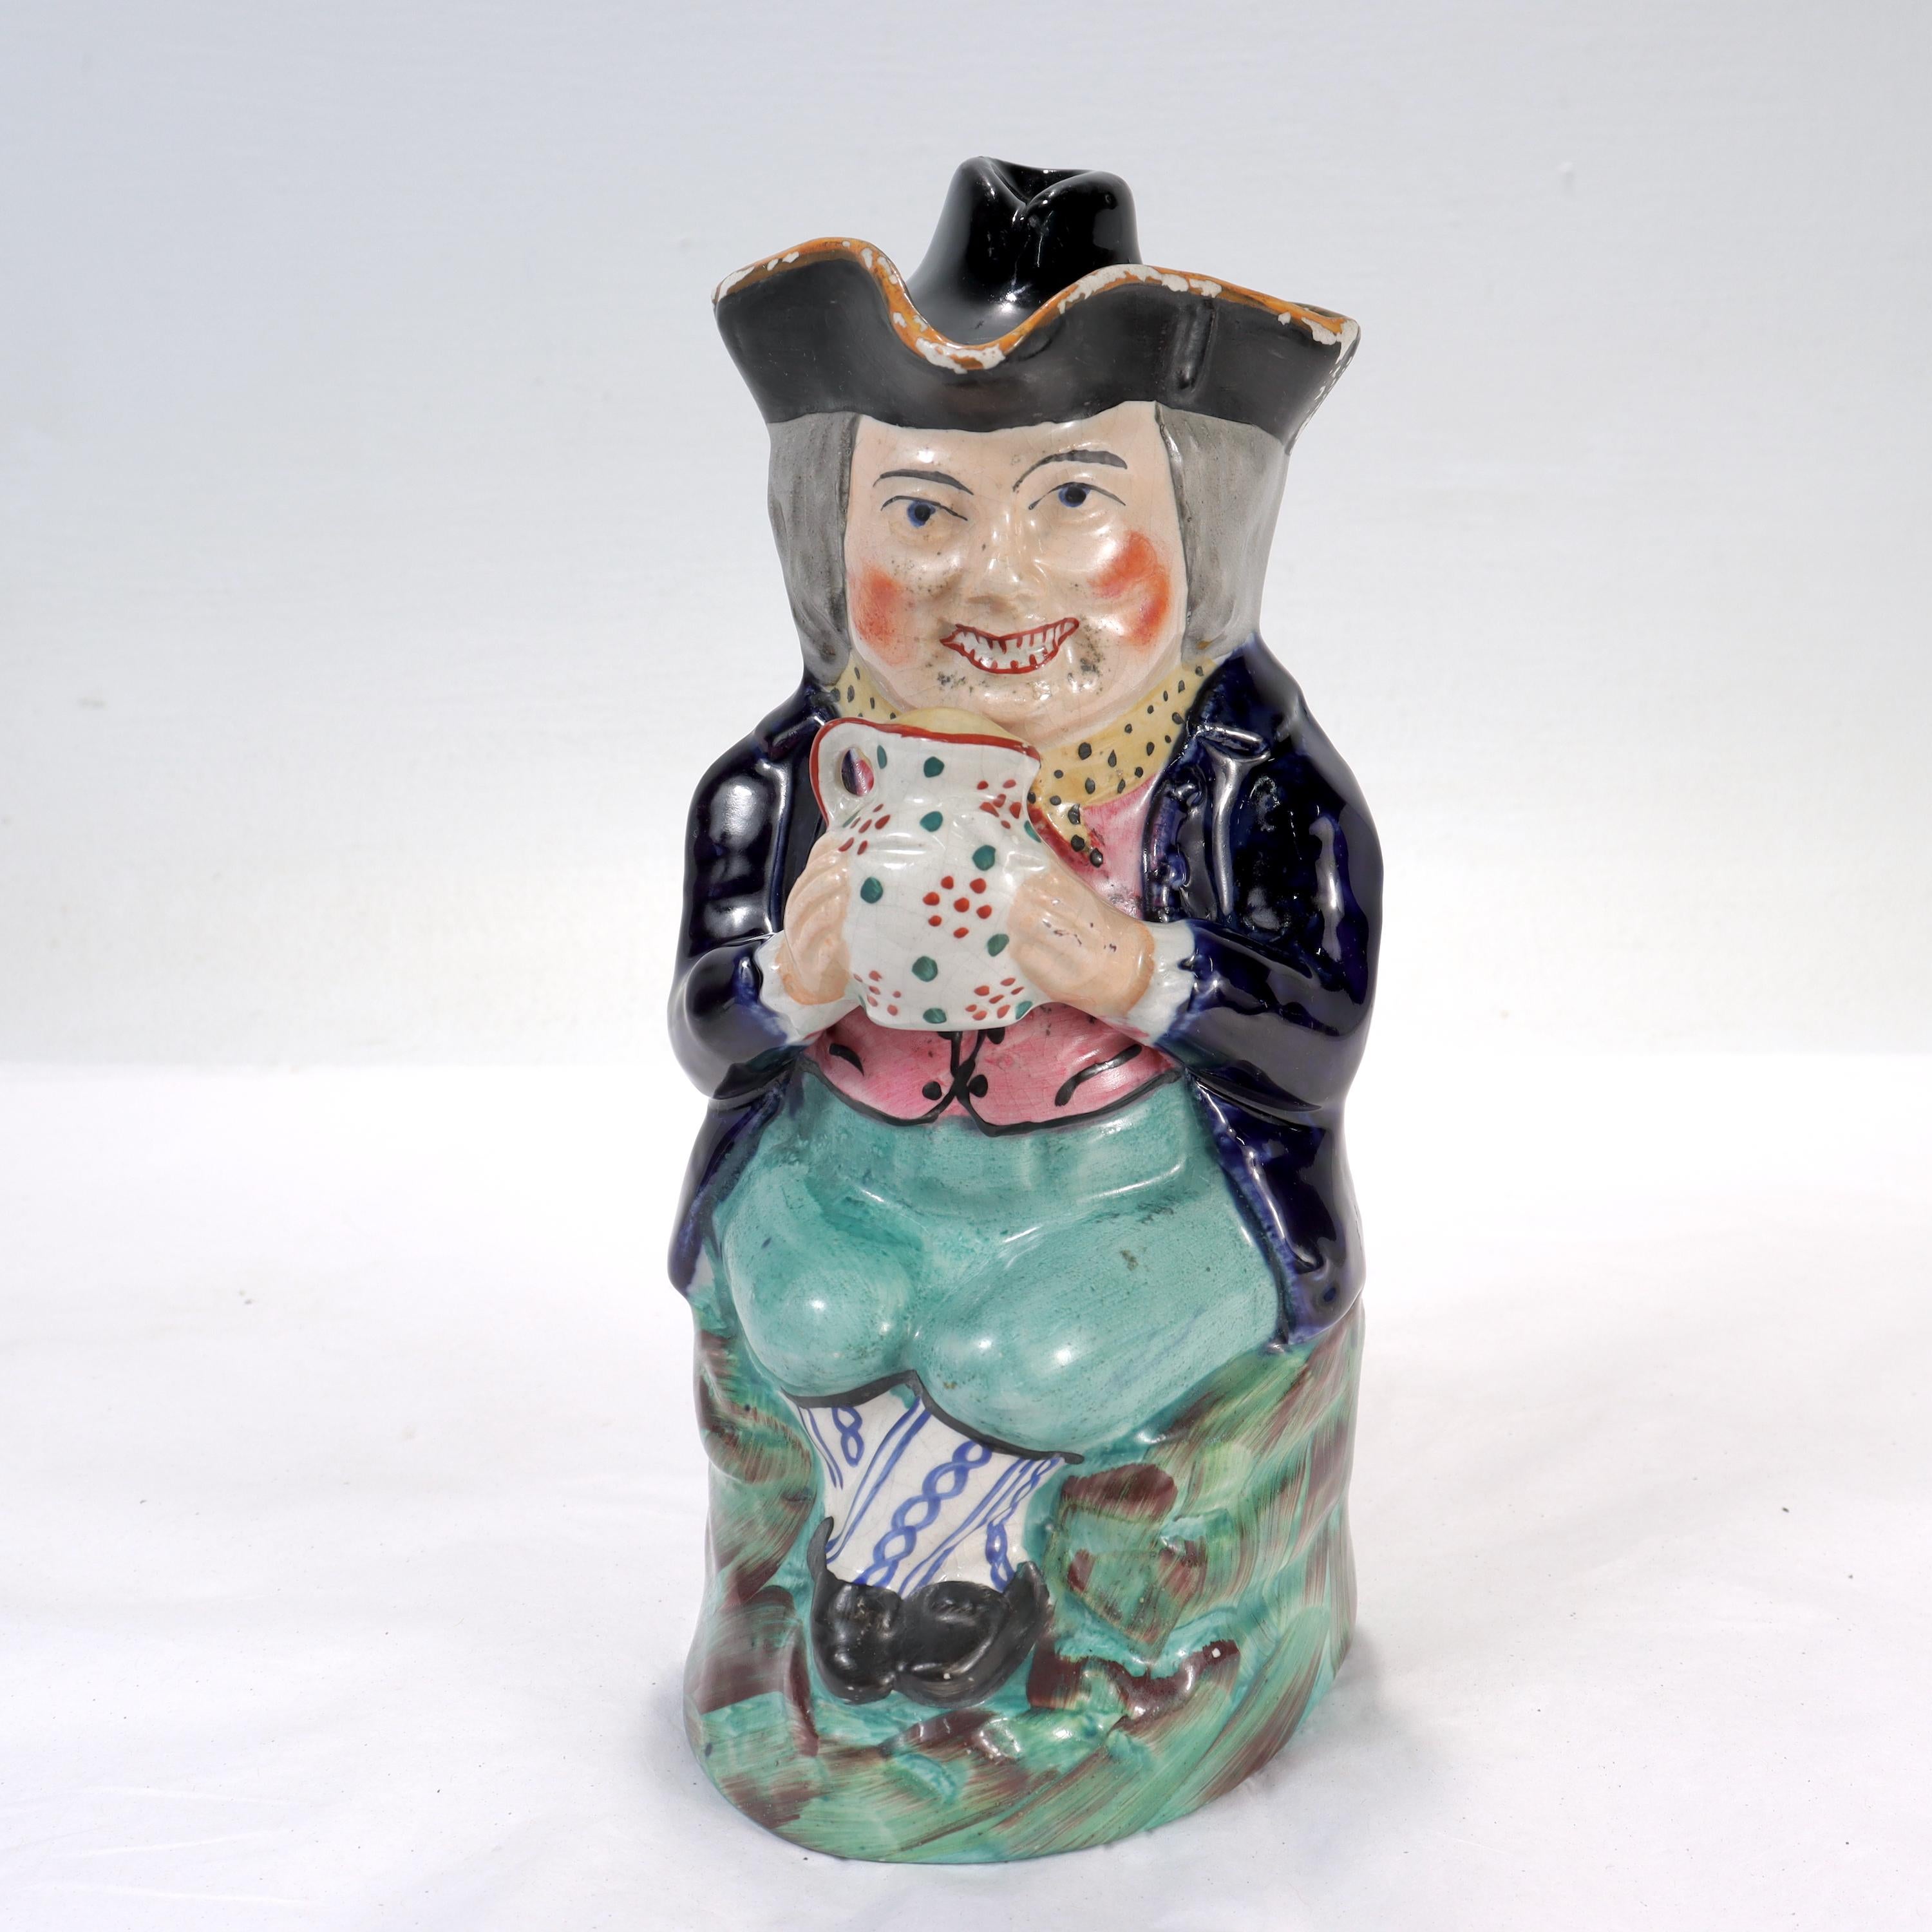 A fine antique Staffordshire pottery Toby jug.

In the form of a seated, smiling man holding a jug.

The man's tricorn hat serves as a lid, and an integral handle runs down his back.

Simply a great Toby Jug!

Date:
19th Century

Overall